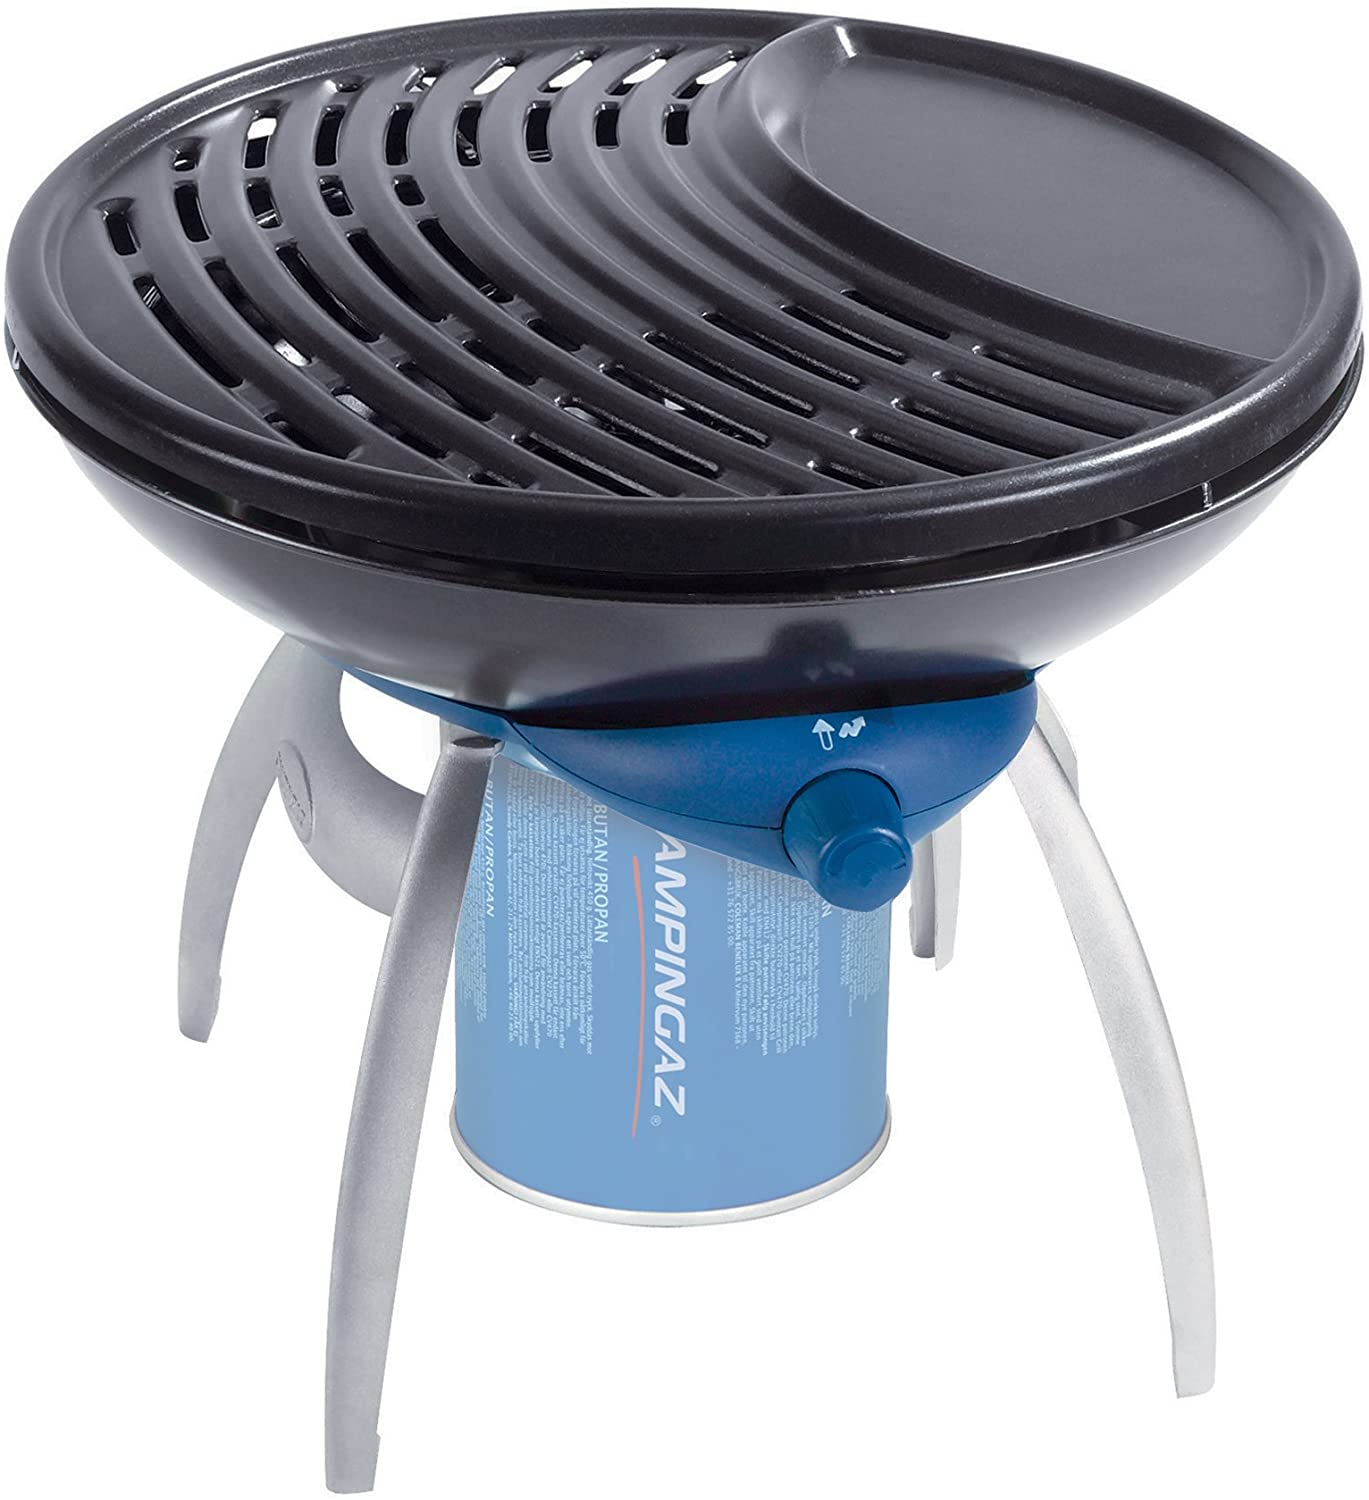 Campingaz Party Grill, All-in-One Portable Camping BBQ